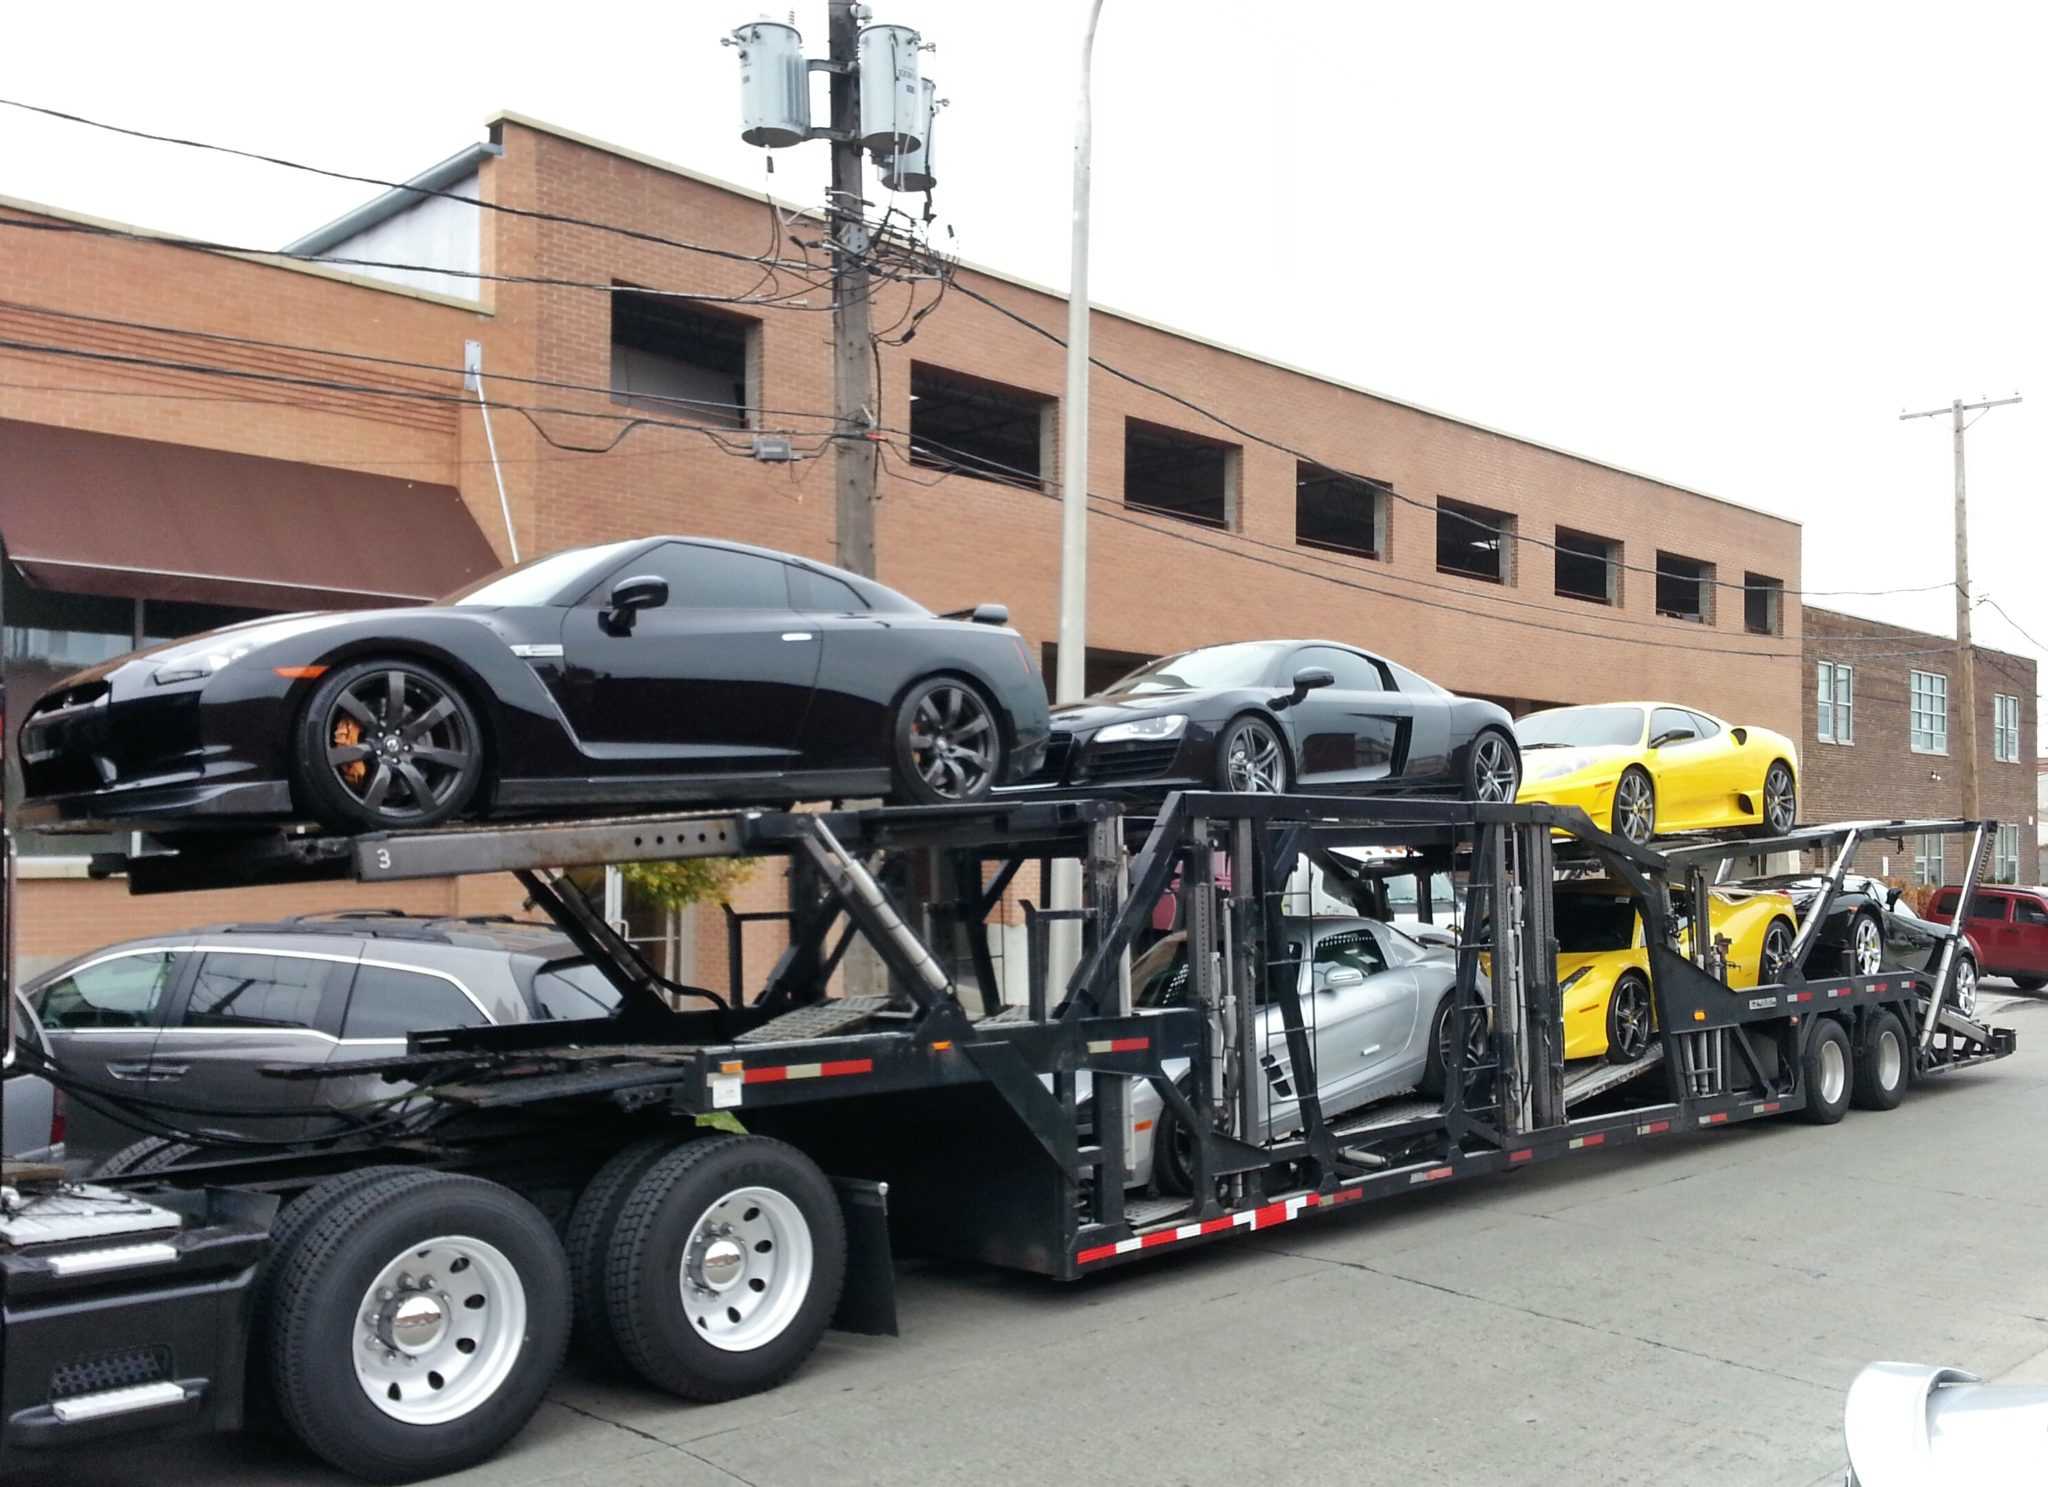 a truck load of exotic supercars holding over $1,000,000 worth of cars